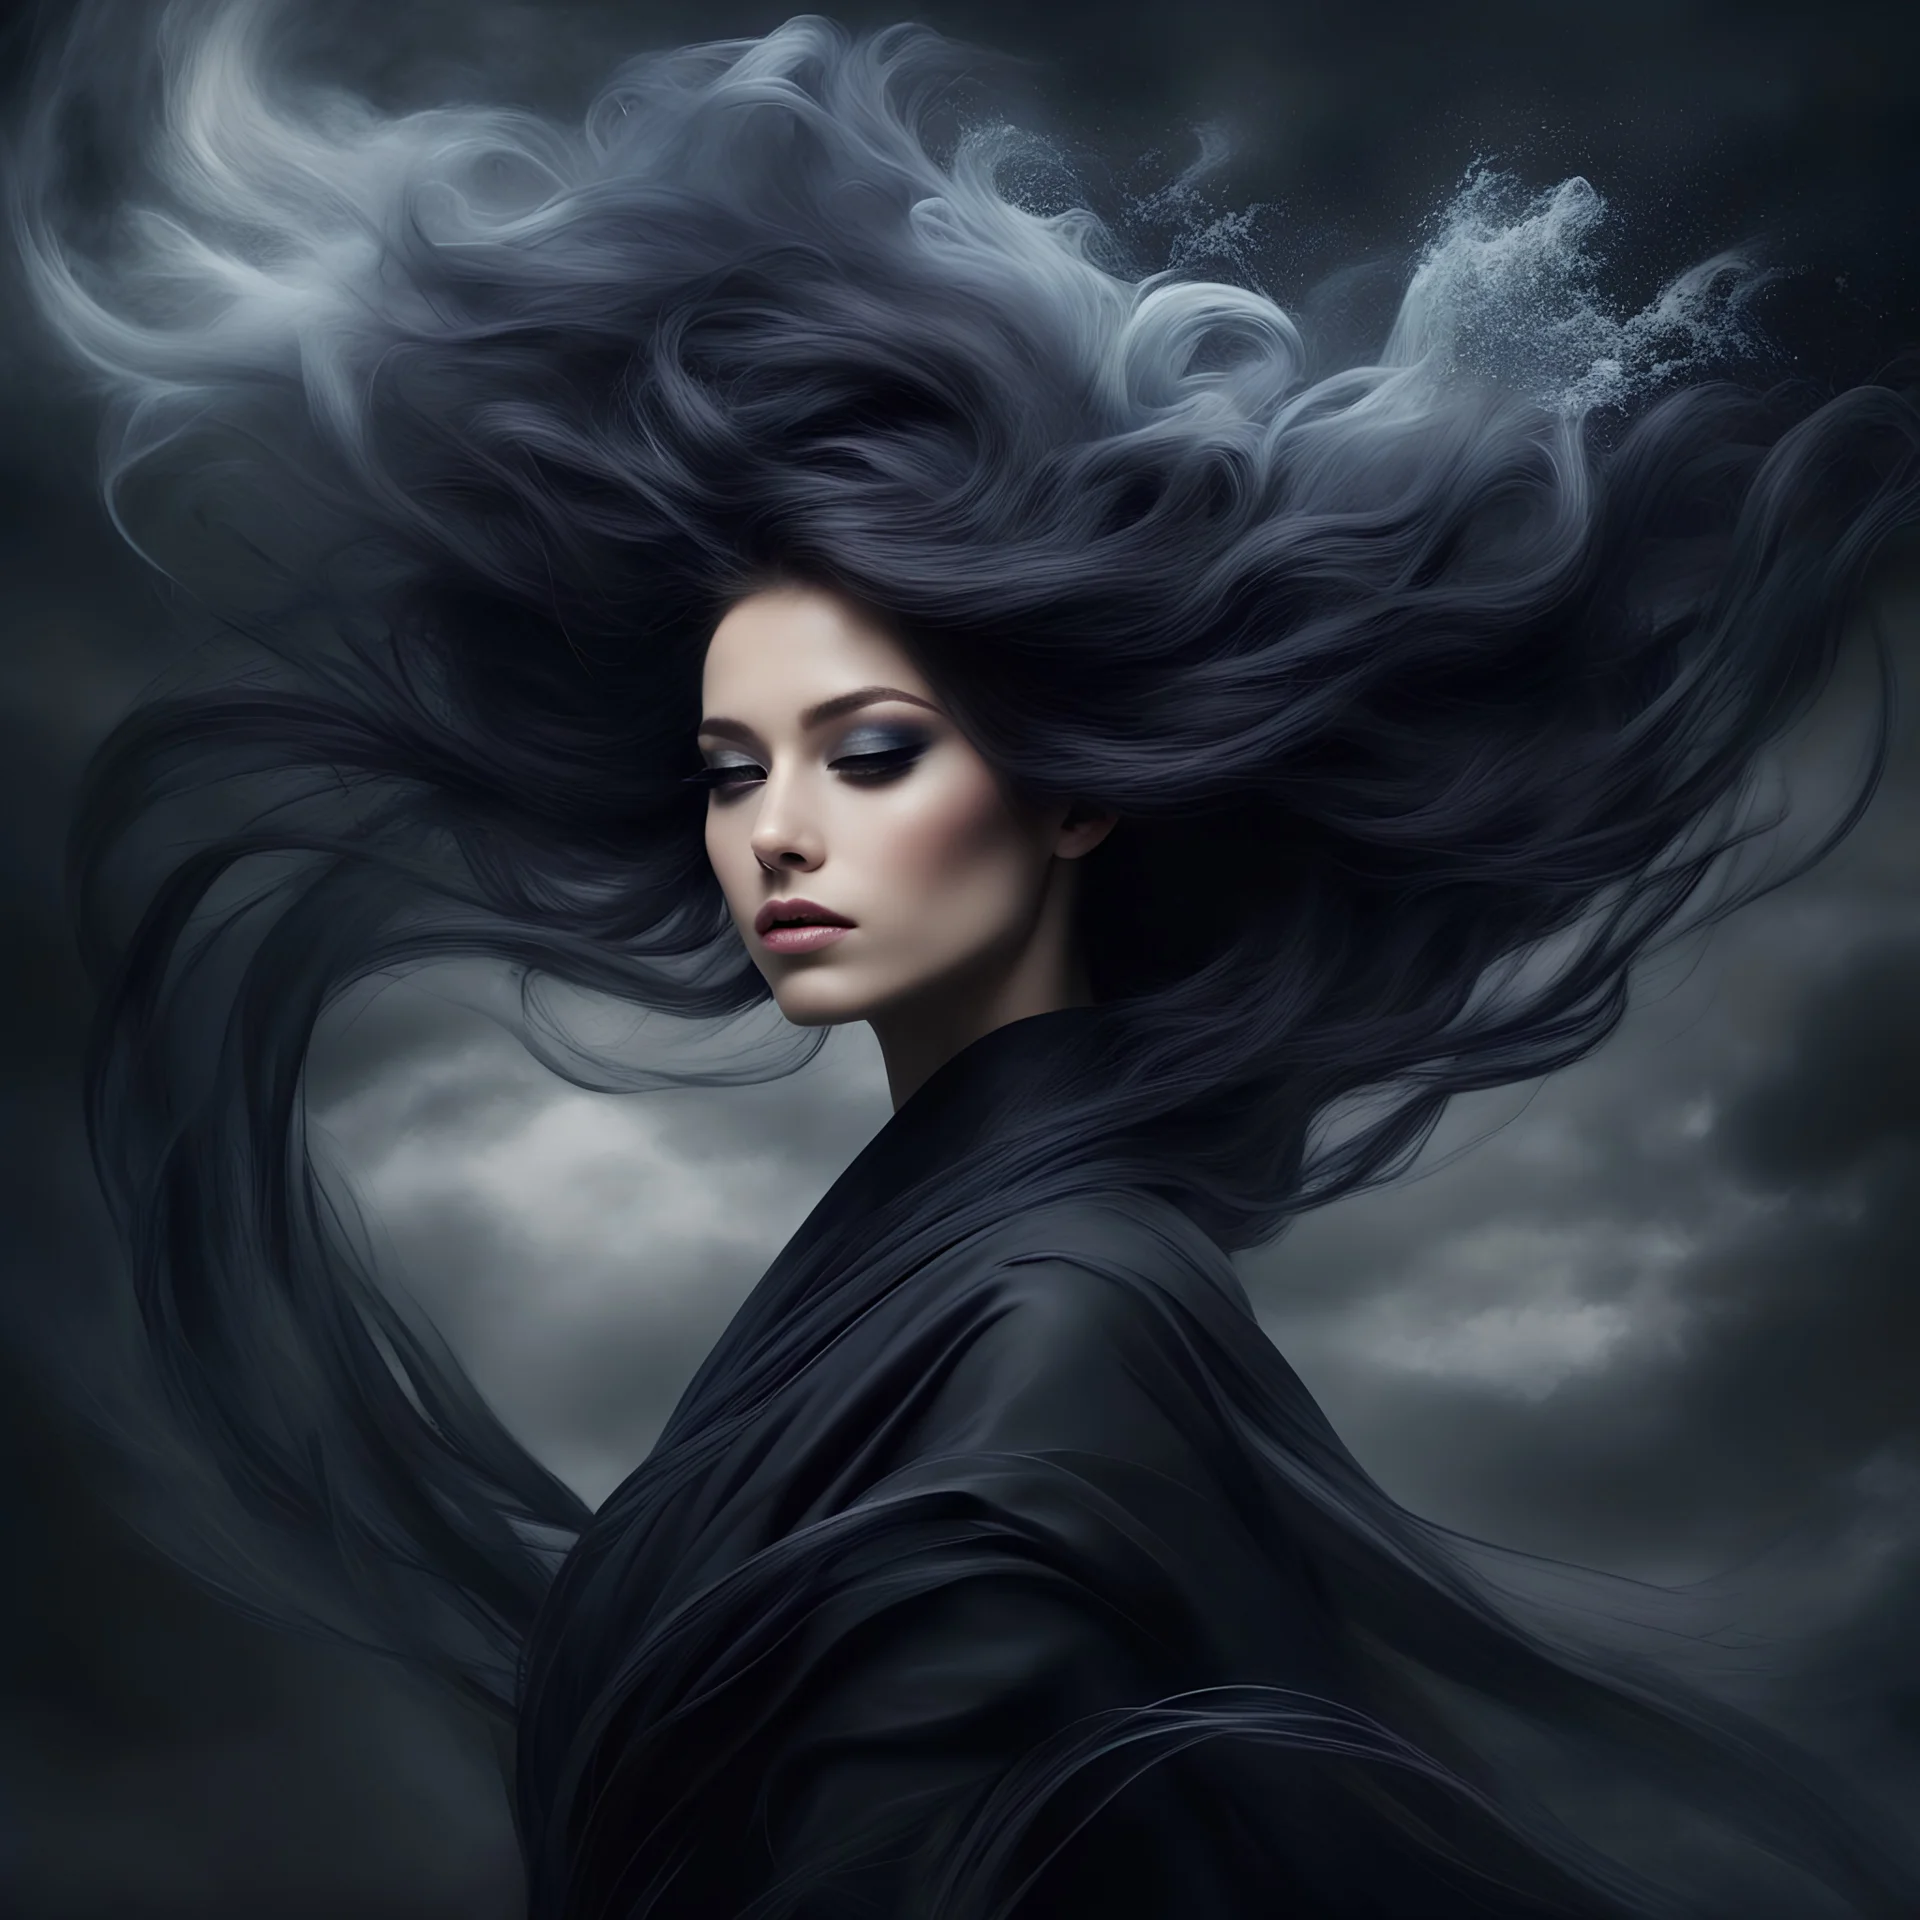 a girl with hair and flower on her forehead, in the style of eerie dreamscapes, flowing fabrics, t romantic windblowing, swirling hair, Windy, swirling dark style Dark, misty, fantasy Dark, Texture, eerie, macabre, black smoke, ultraclear image"